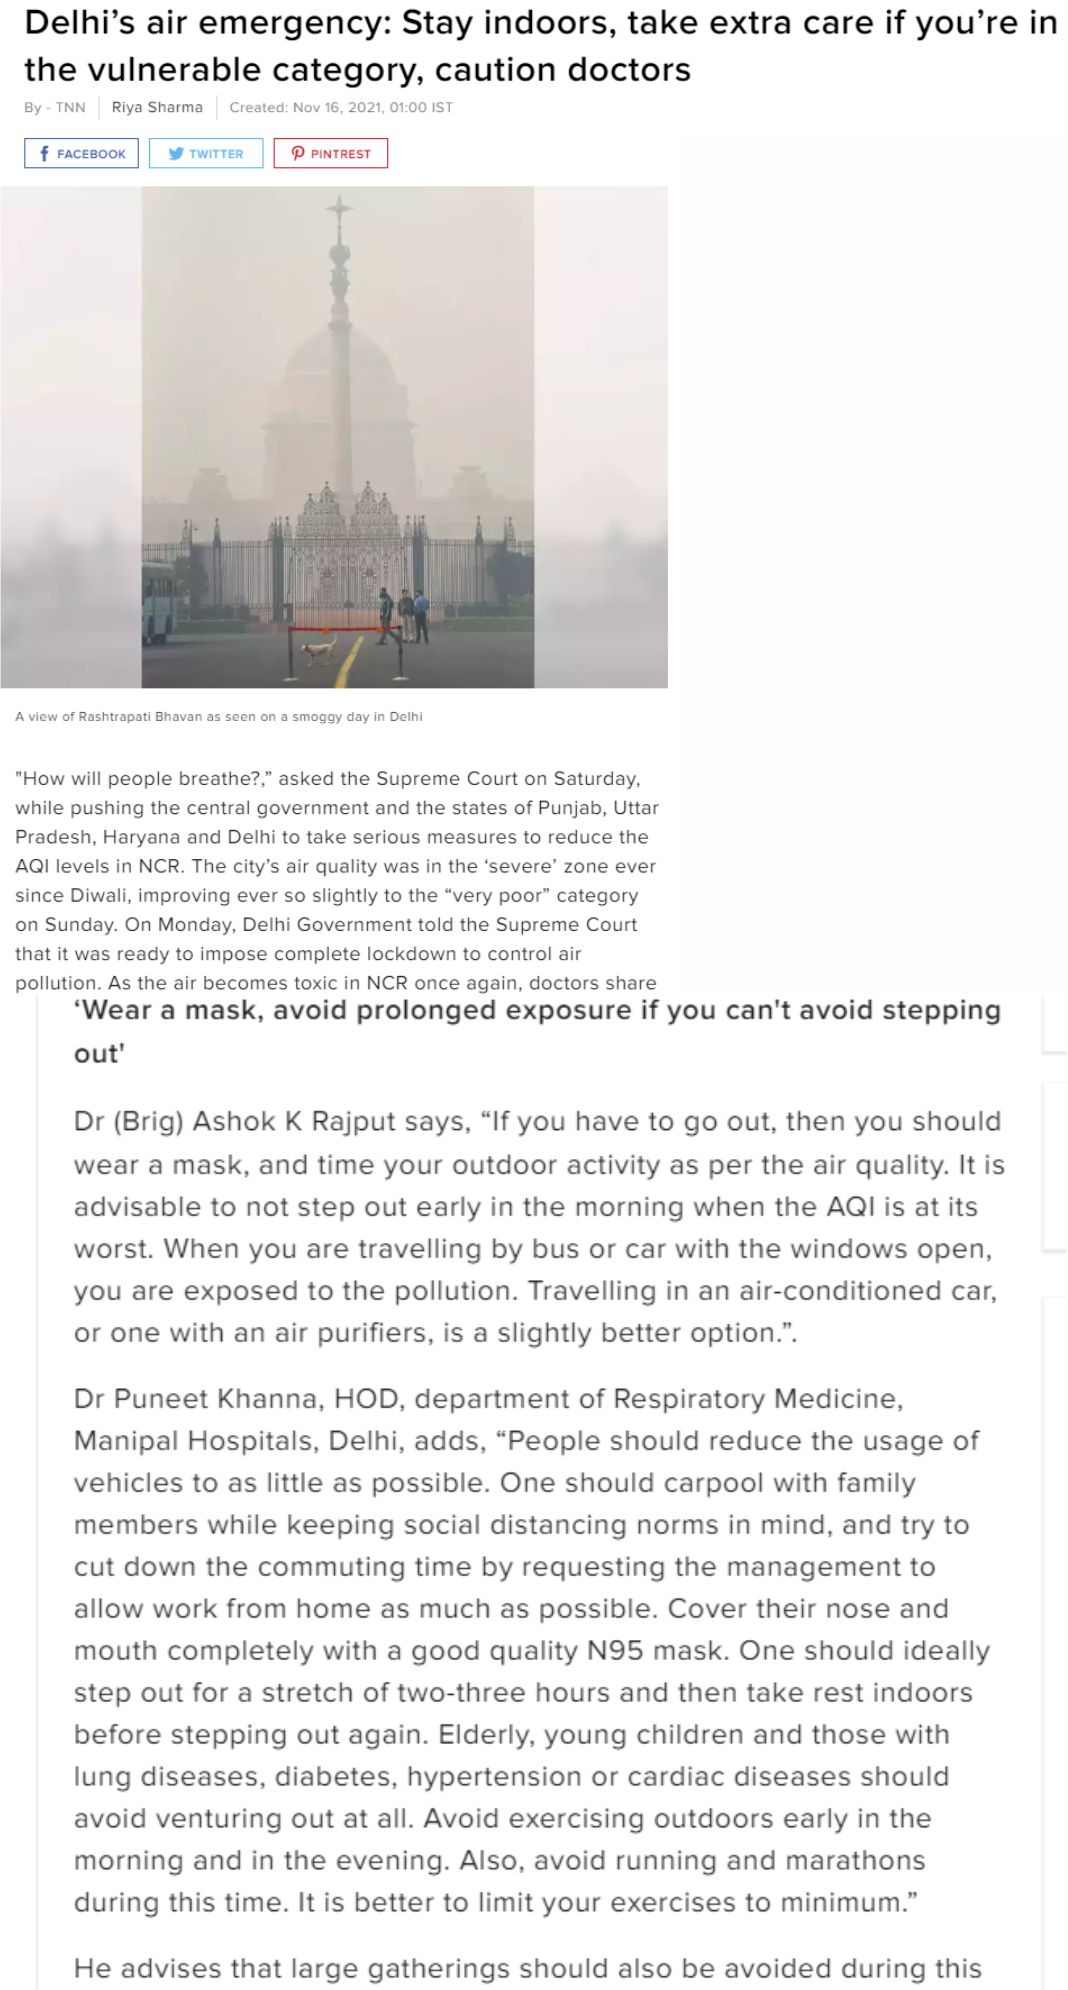 delhi-s-air-emergency-stay-indoors-take-extra-care-if-you-re-in-the-vulnerable-category-caution-doctors